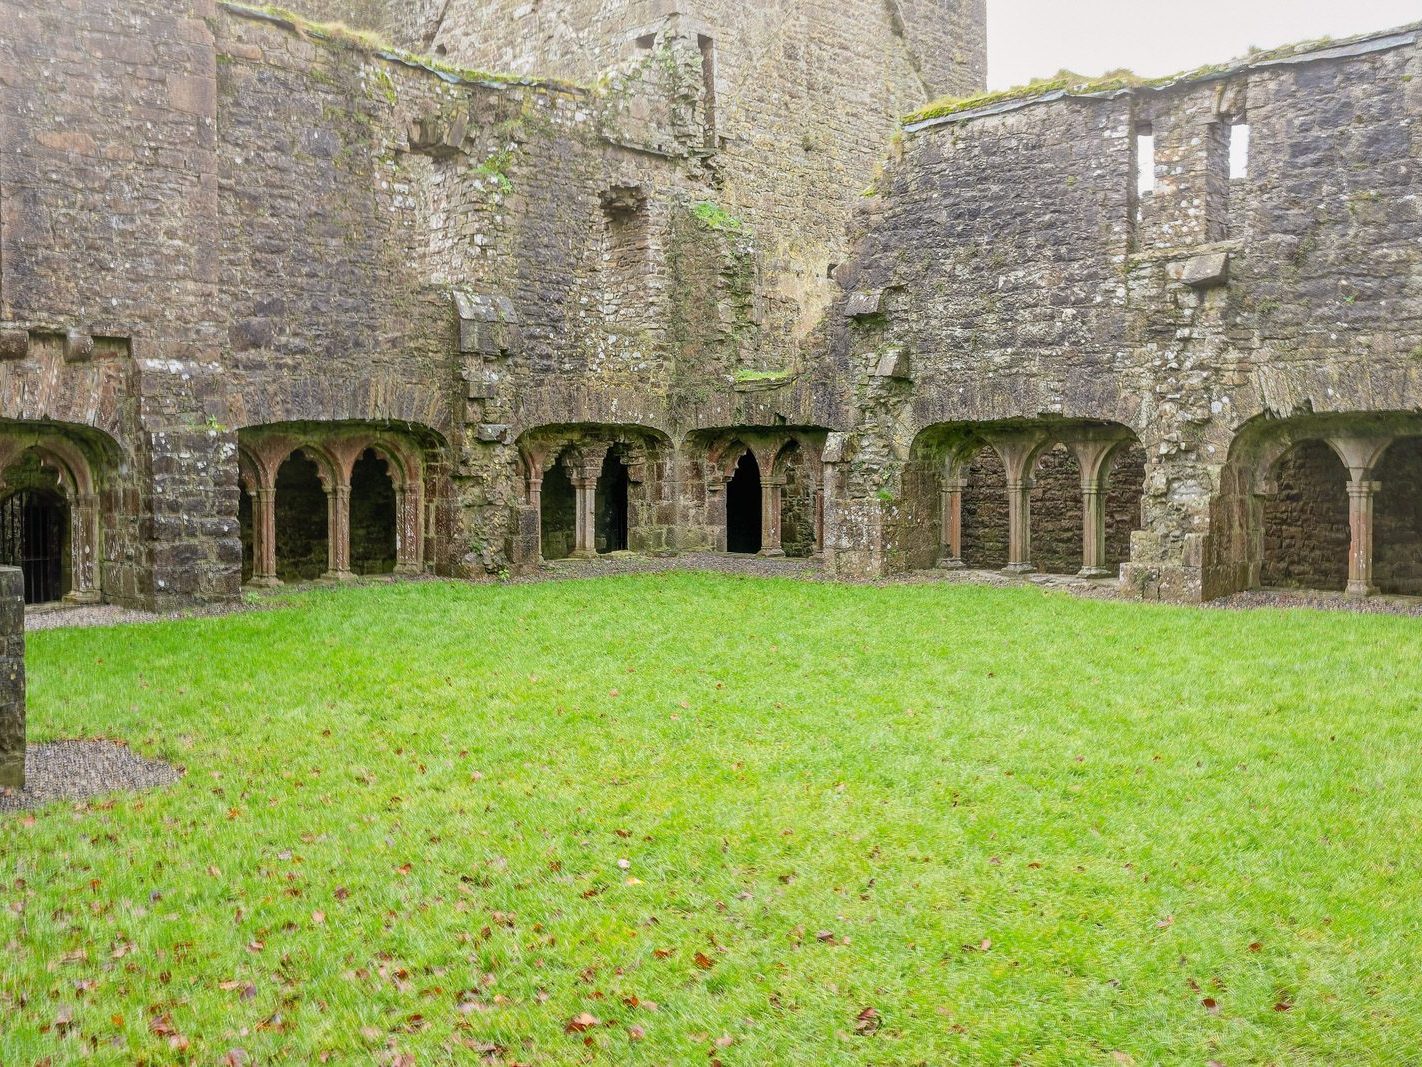 BECTIVE ABBEY WHICH I VISITED LAST CHRISTMAS [THERE WERE NO OTHER VISITORS AS IT WAS A VERY WET DAY]--225221-1